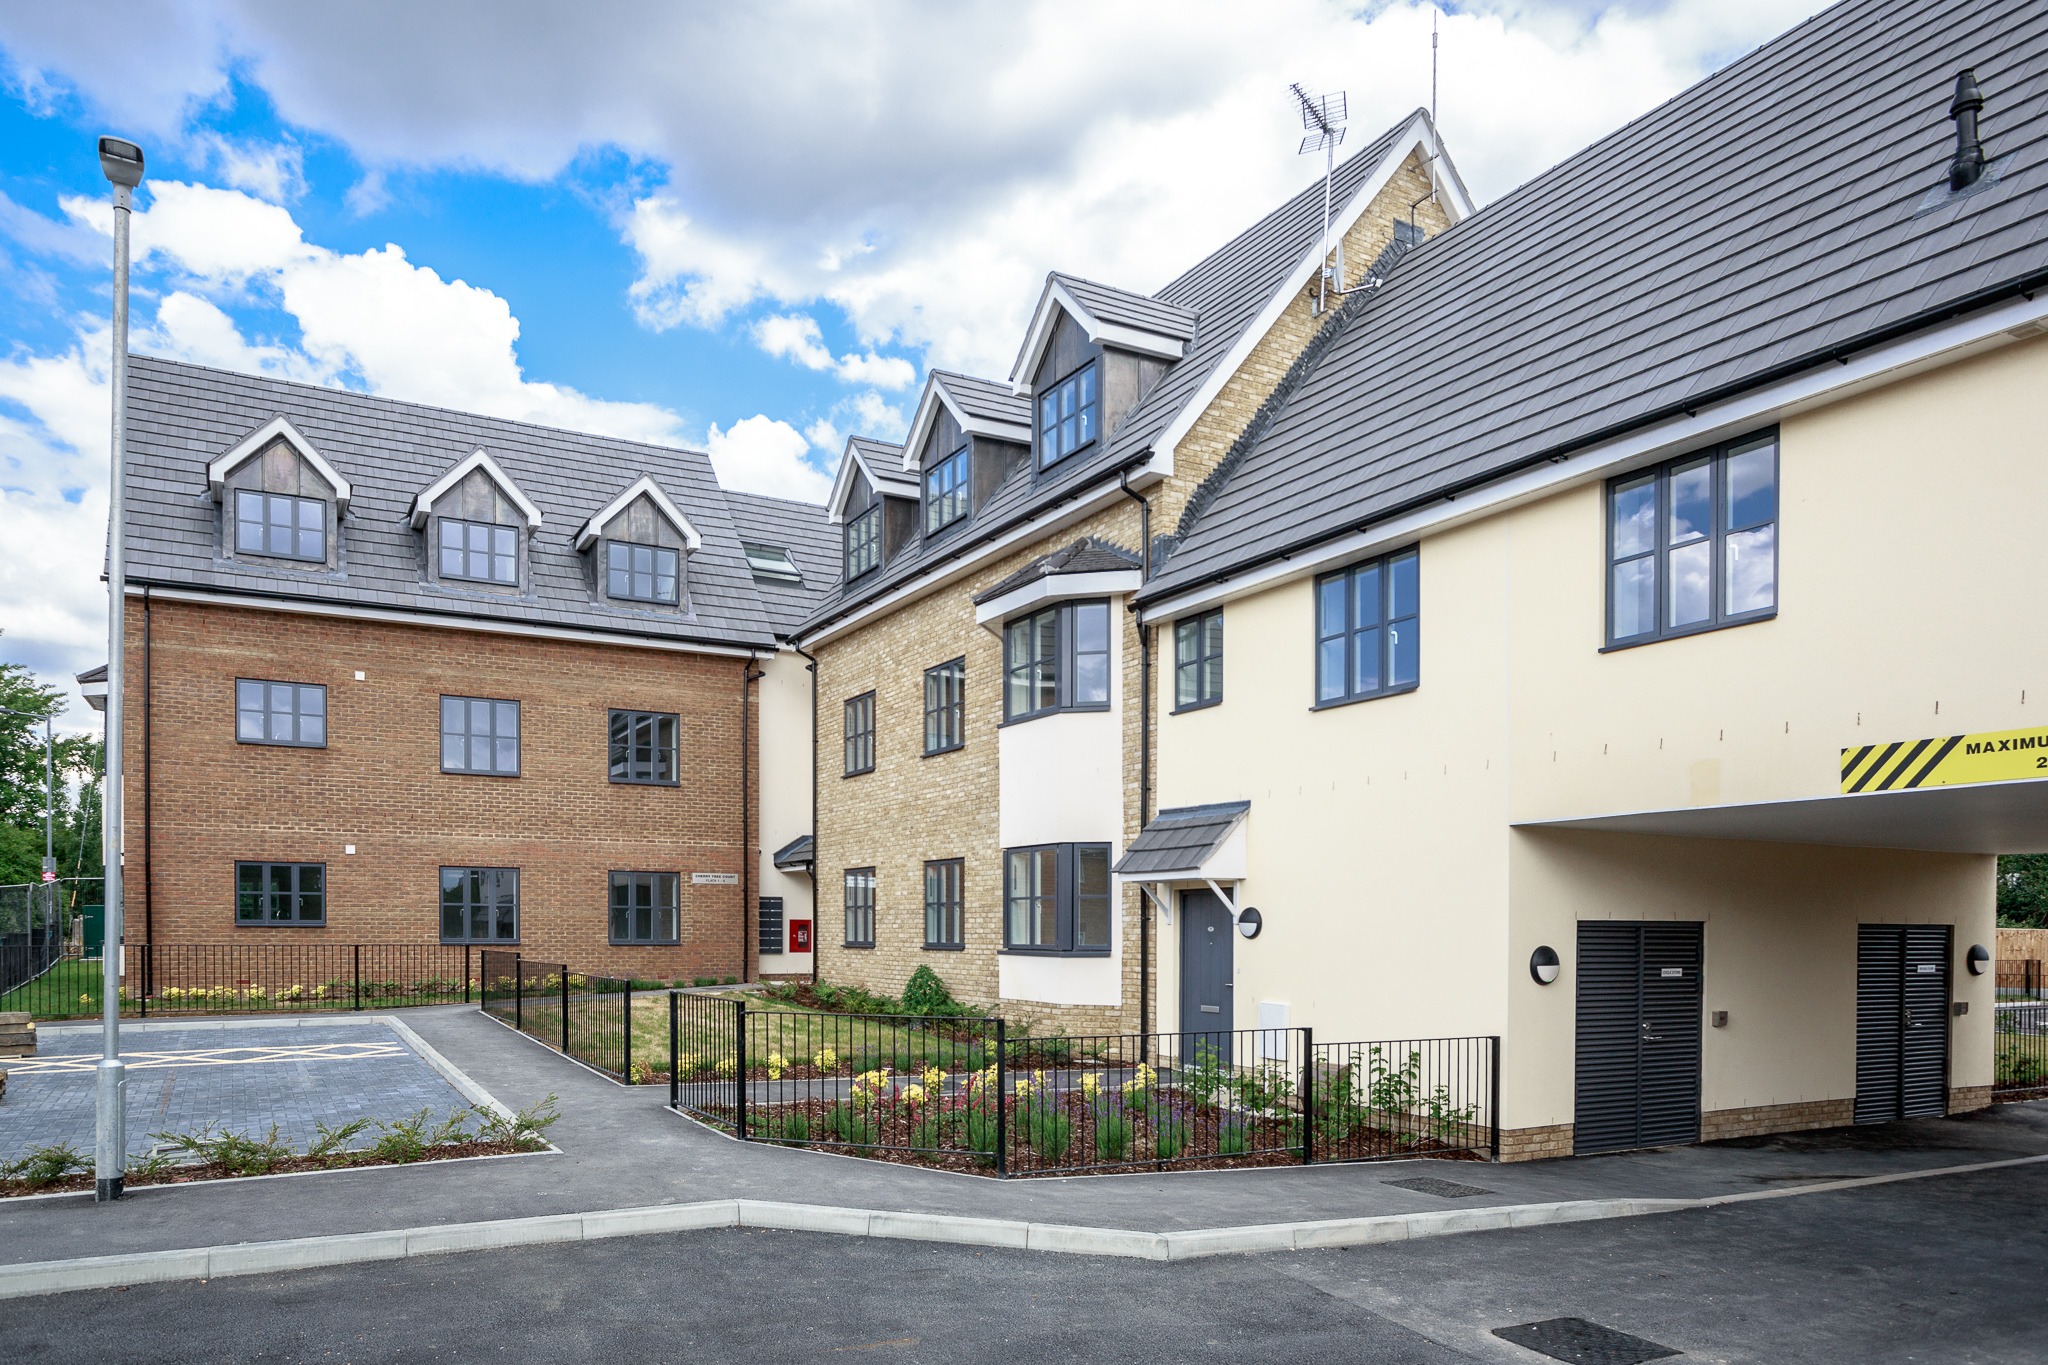 Cherry Tree Court (2 Bed Apartments) - Introduction